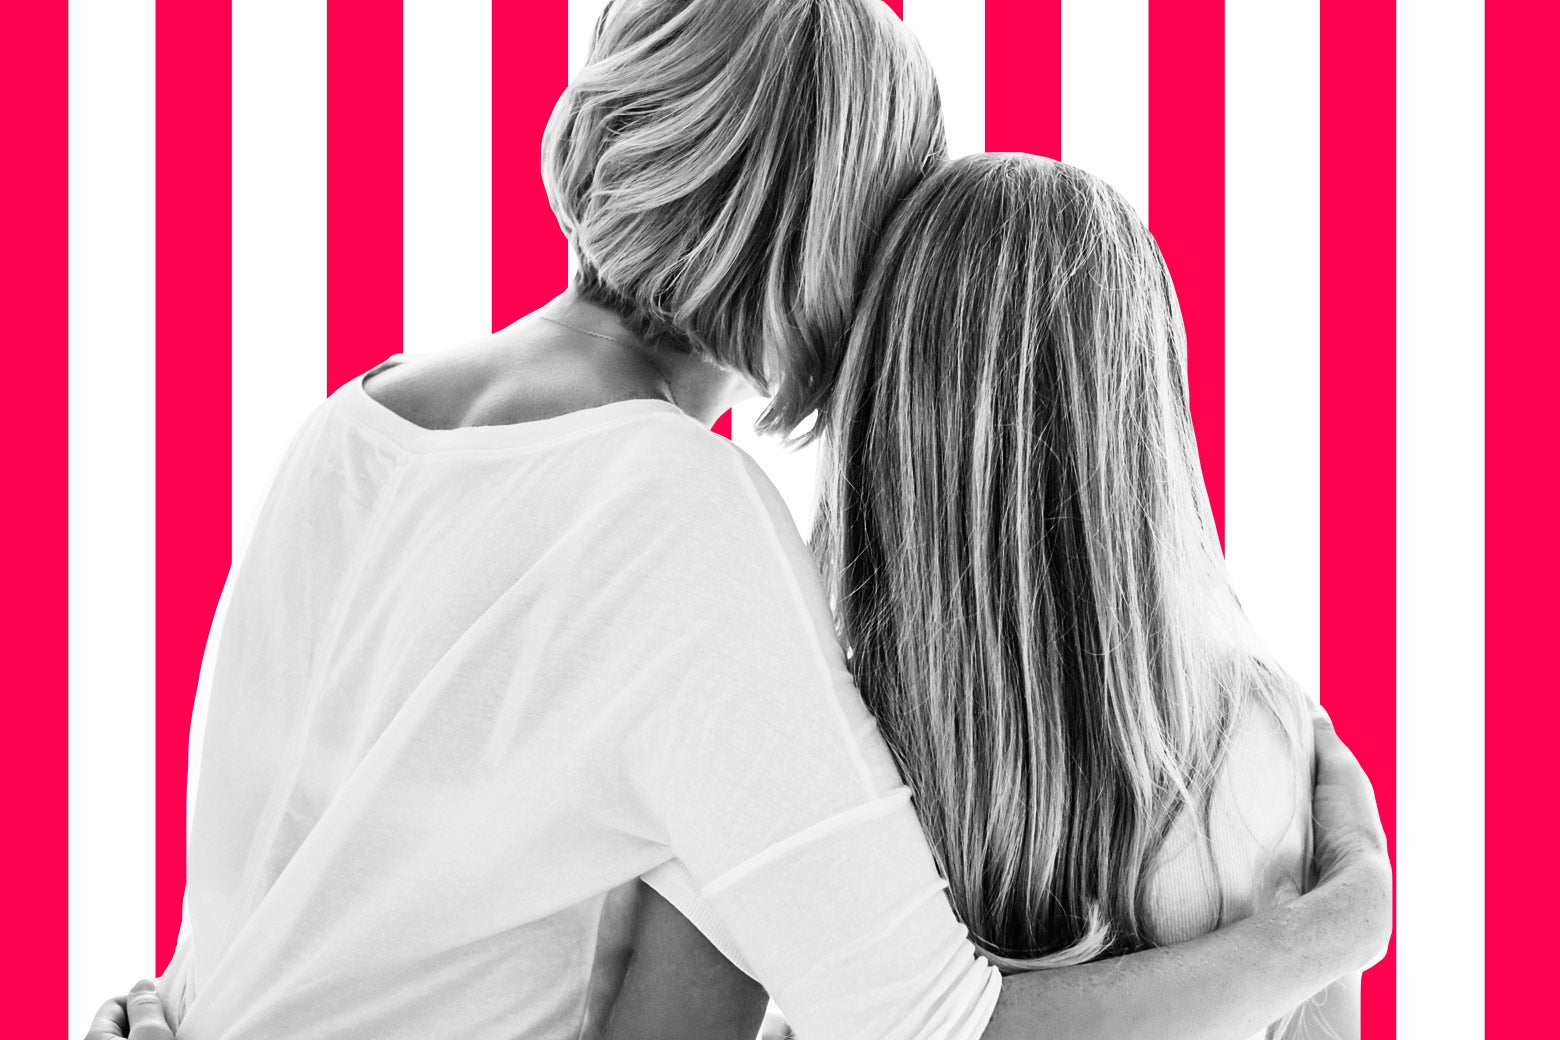 backsides of a woman hugging a teen girl (or young woman) over rotating pink and white bars